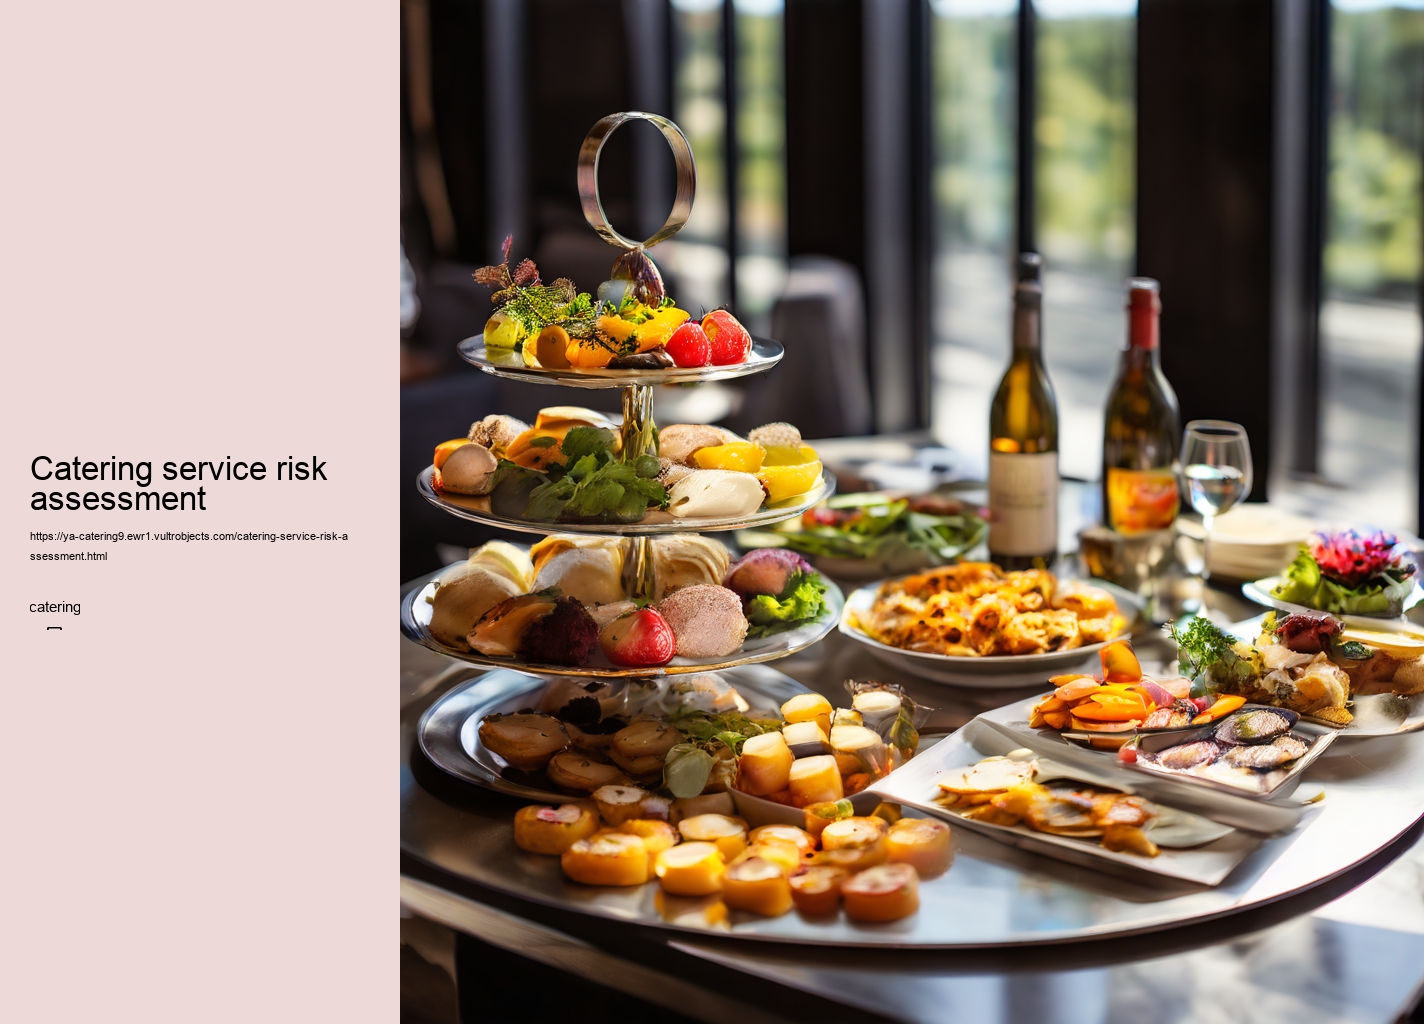 Catering service risk assessment